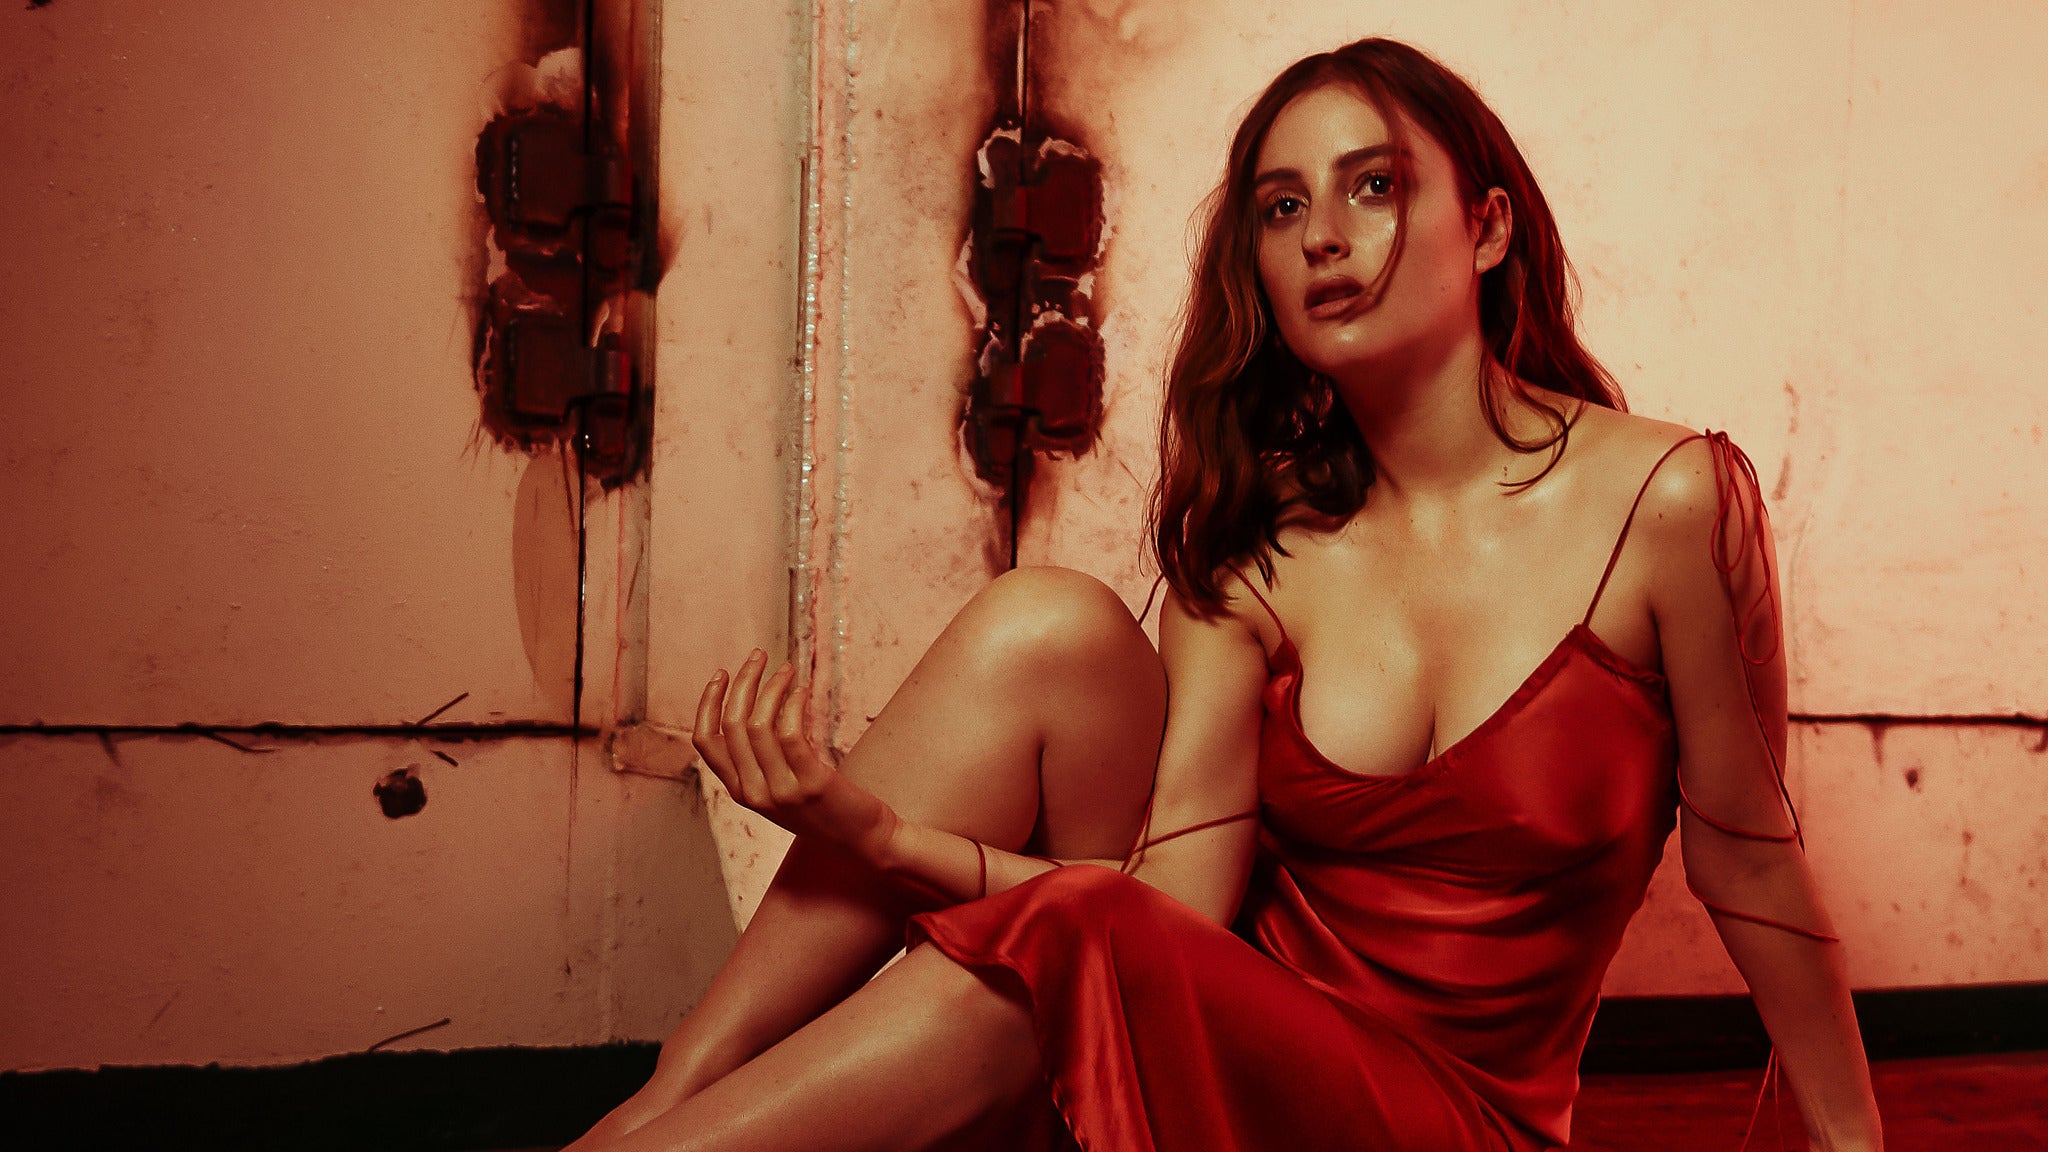 BANKS - The III Tour in New Orleans promo photo for Live Nation Mobile App presale offer code